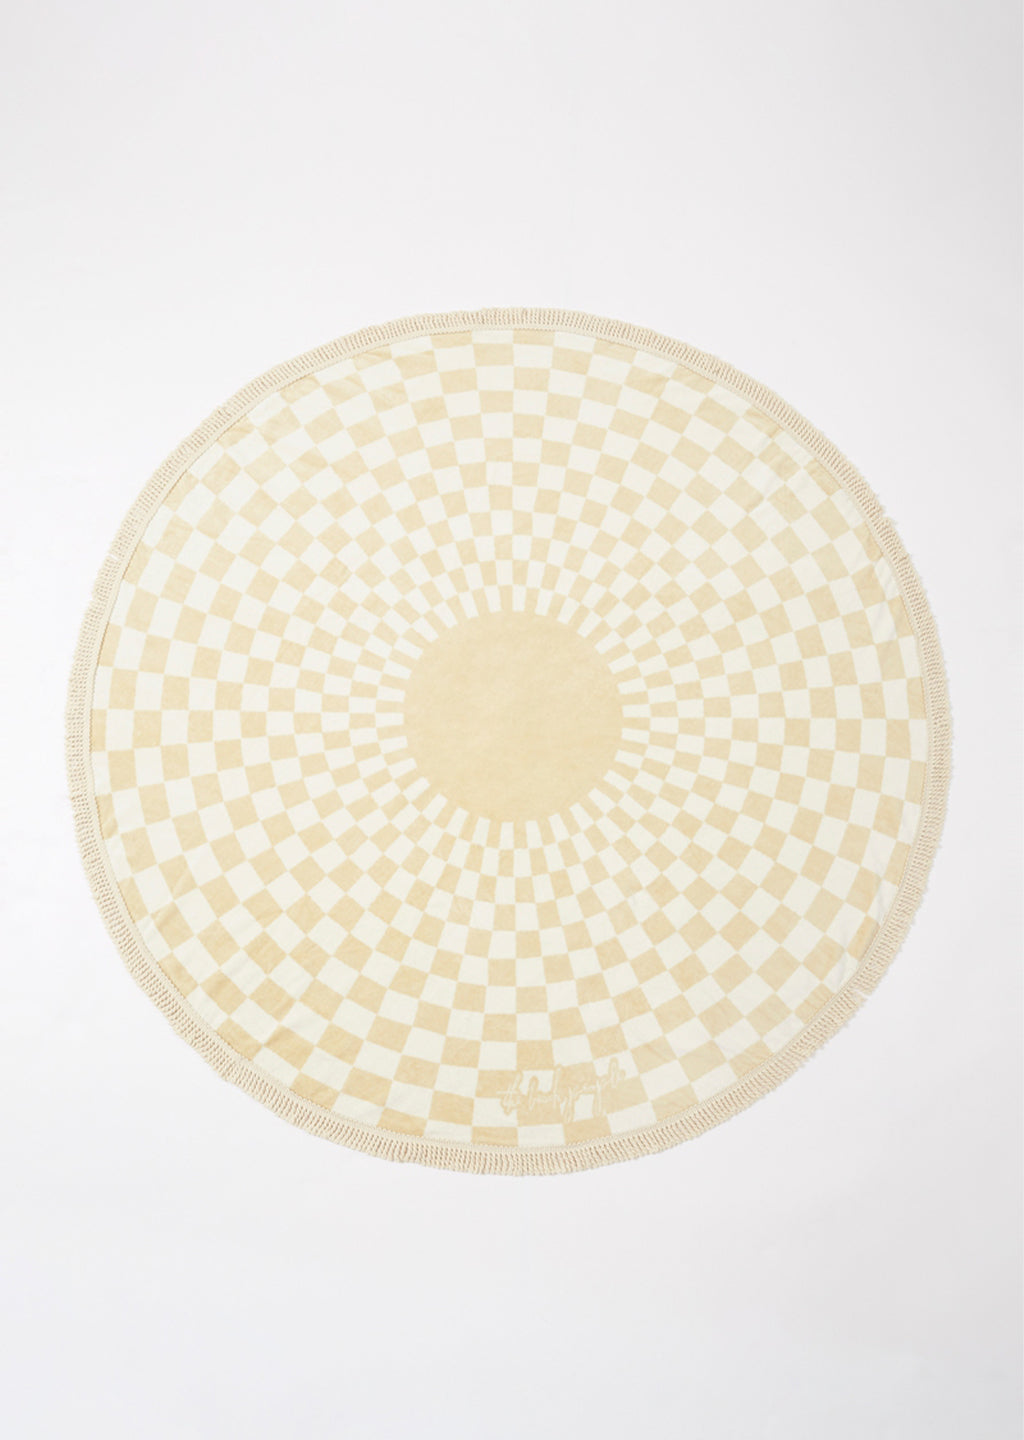 The Beach People Oasis Round Towel laying flat